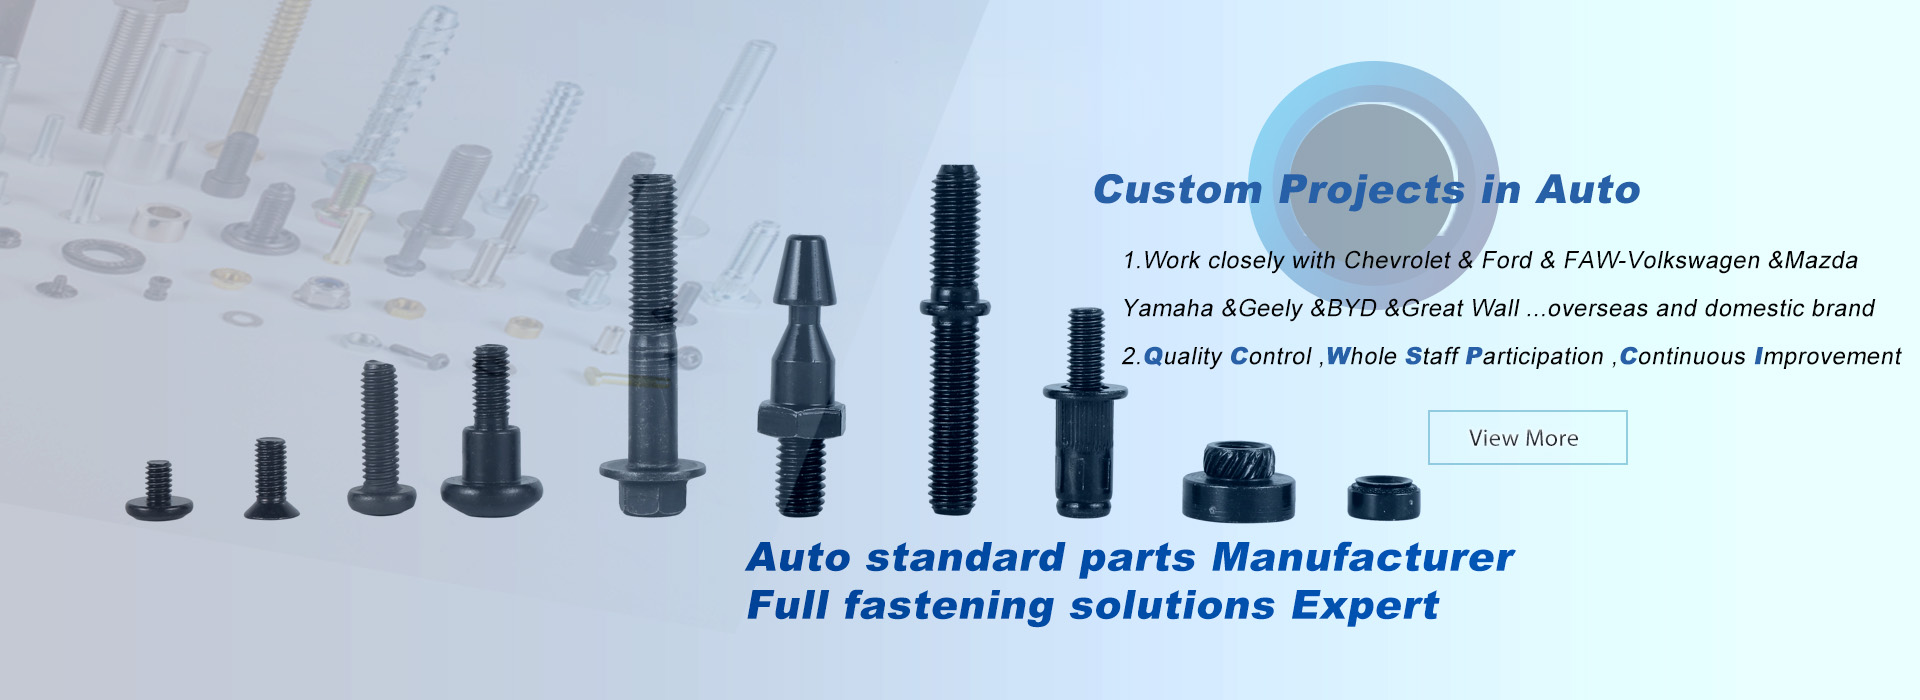 kinsom custom fasteners auto standard parts manufacturer and full fastening solutions expert banner 06